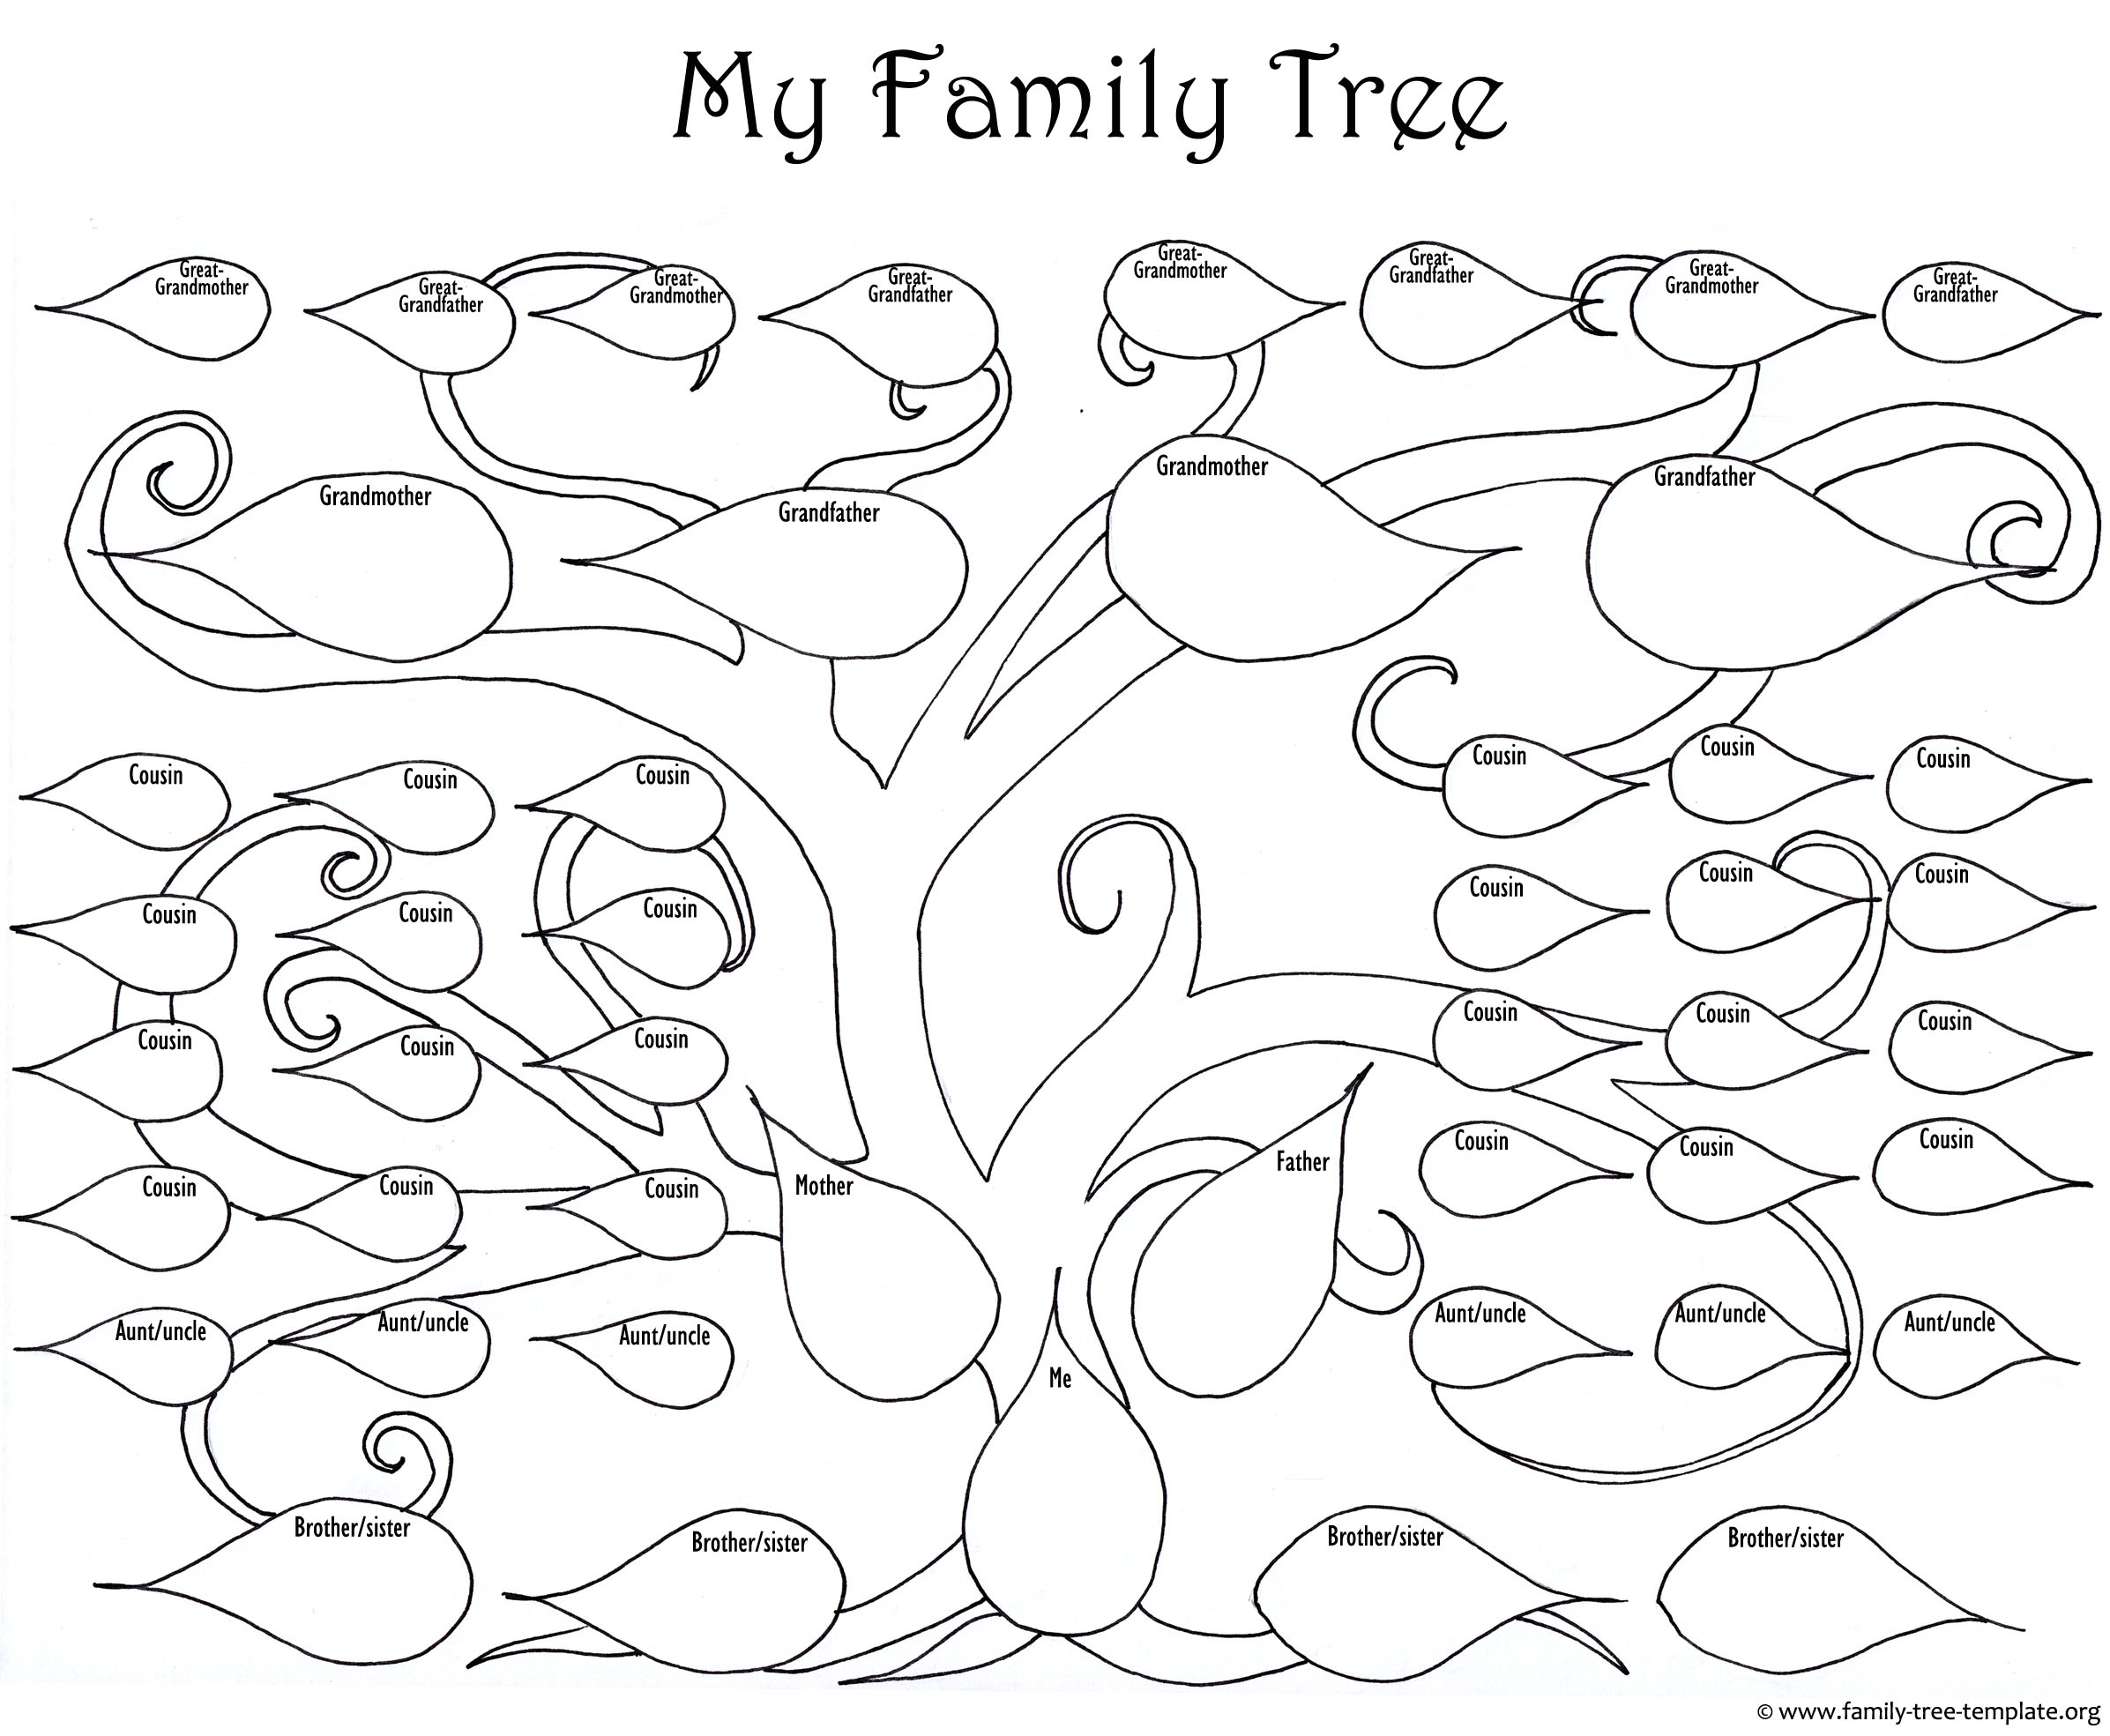 a-printable-blank-family-tree-to-make-your-kids-genealogy-chart-family-tree-template